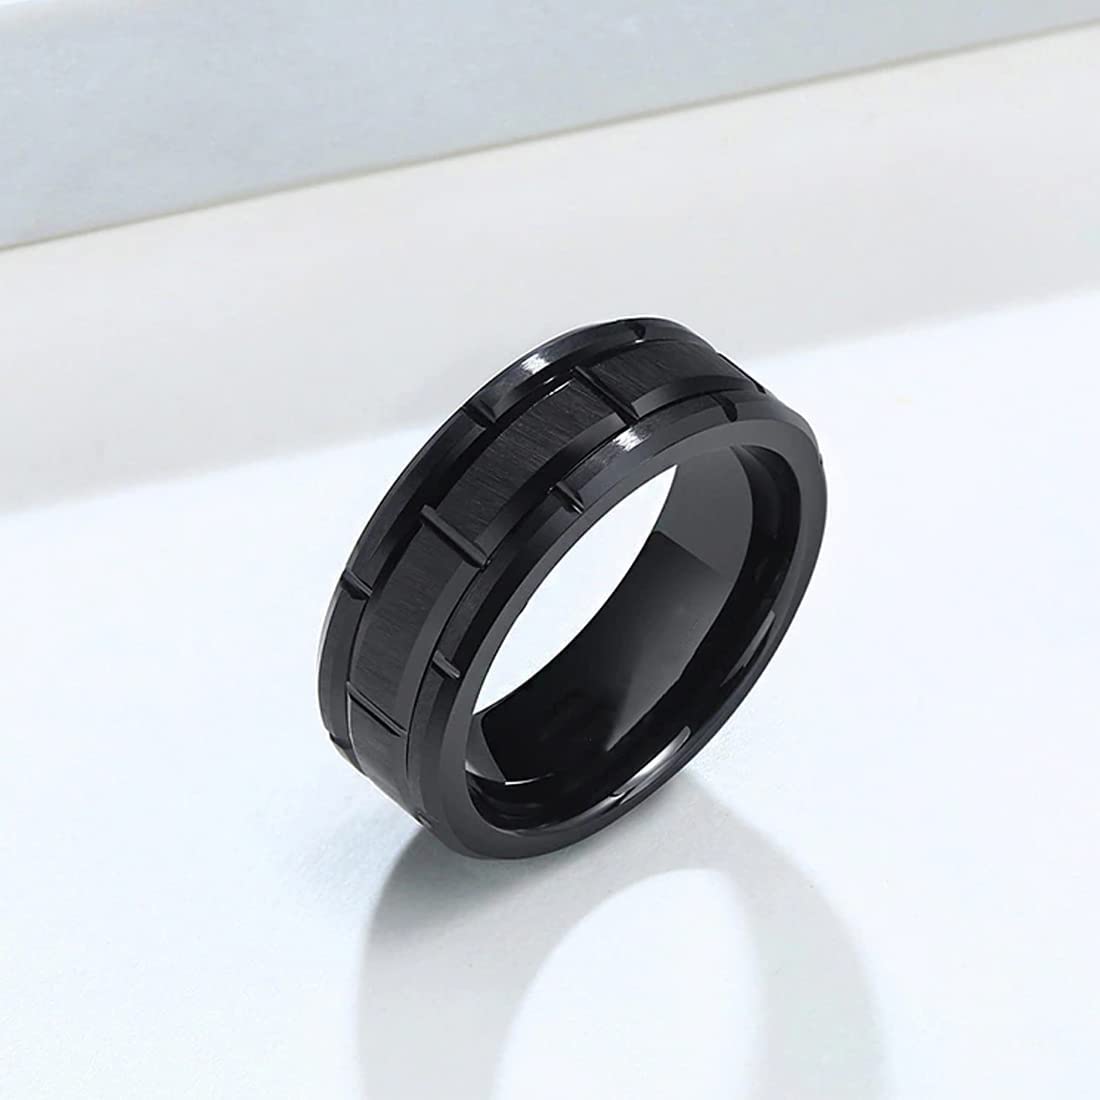 Yellow Chimes Rings for Men Stainless Steel Black Ring Brick Pattern Band Finger Ring for Men and Boys.